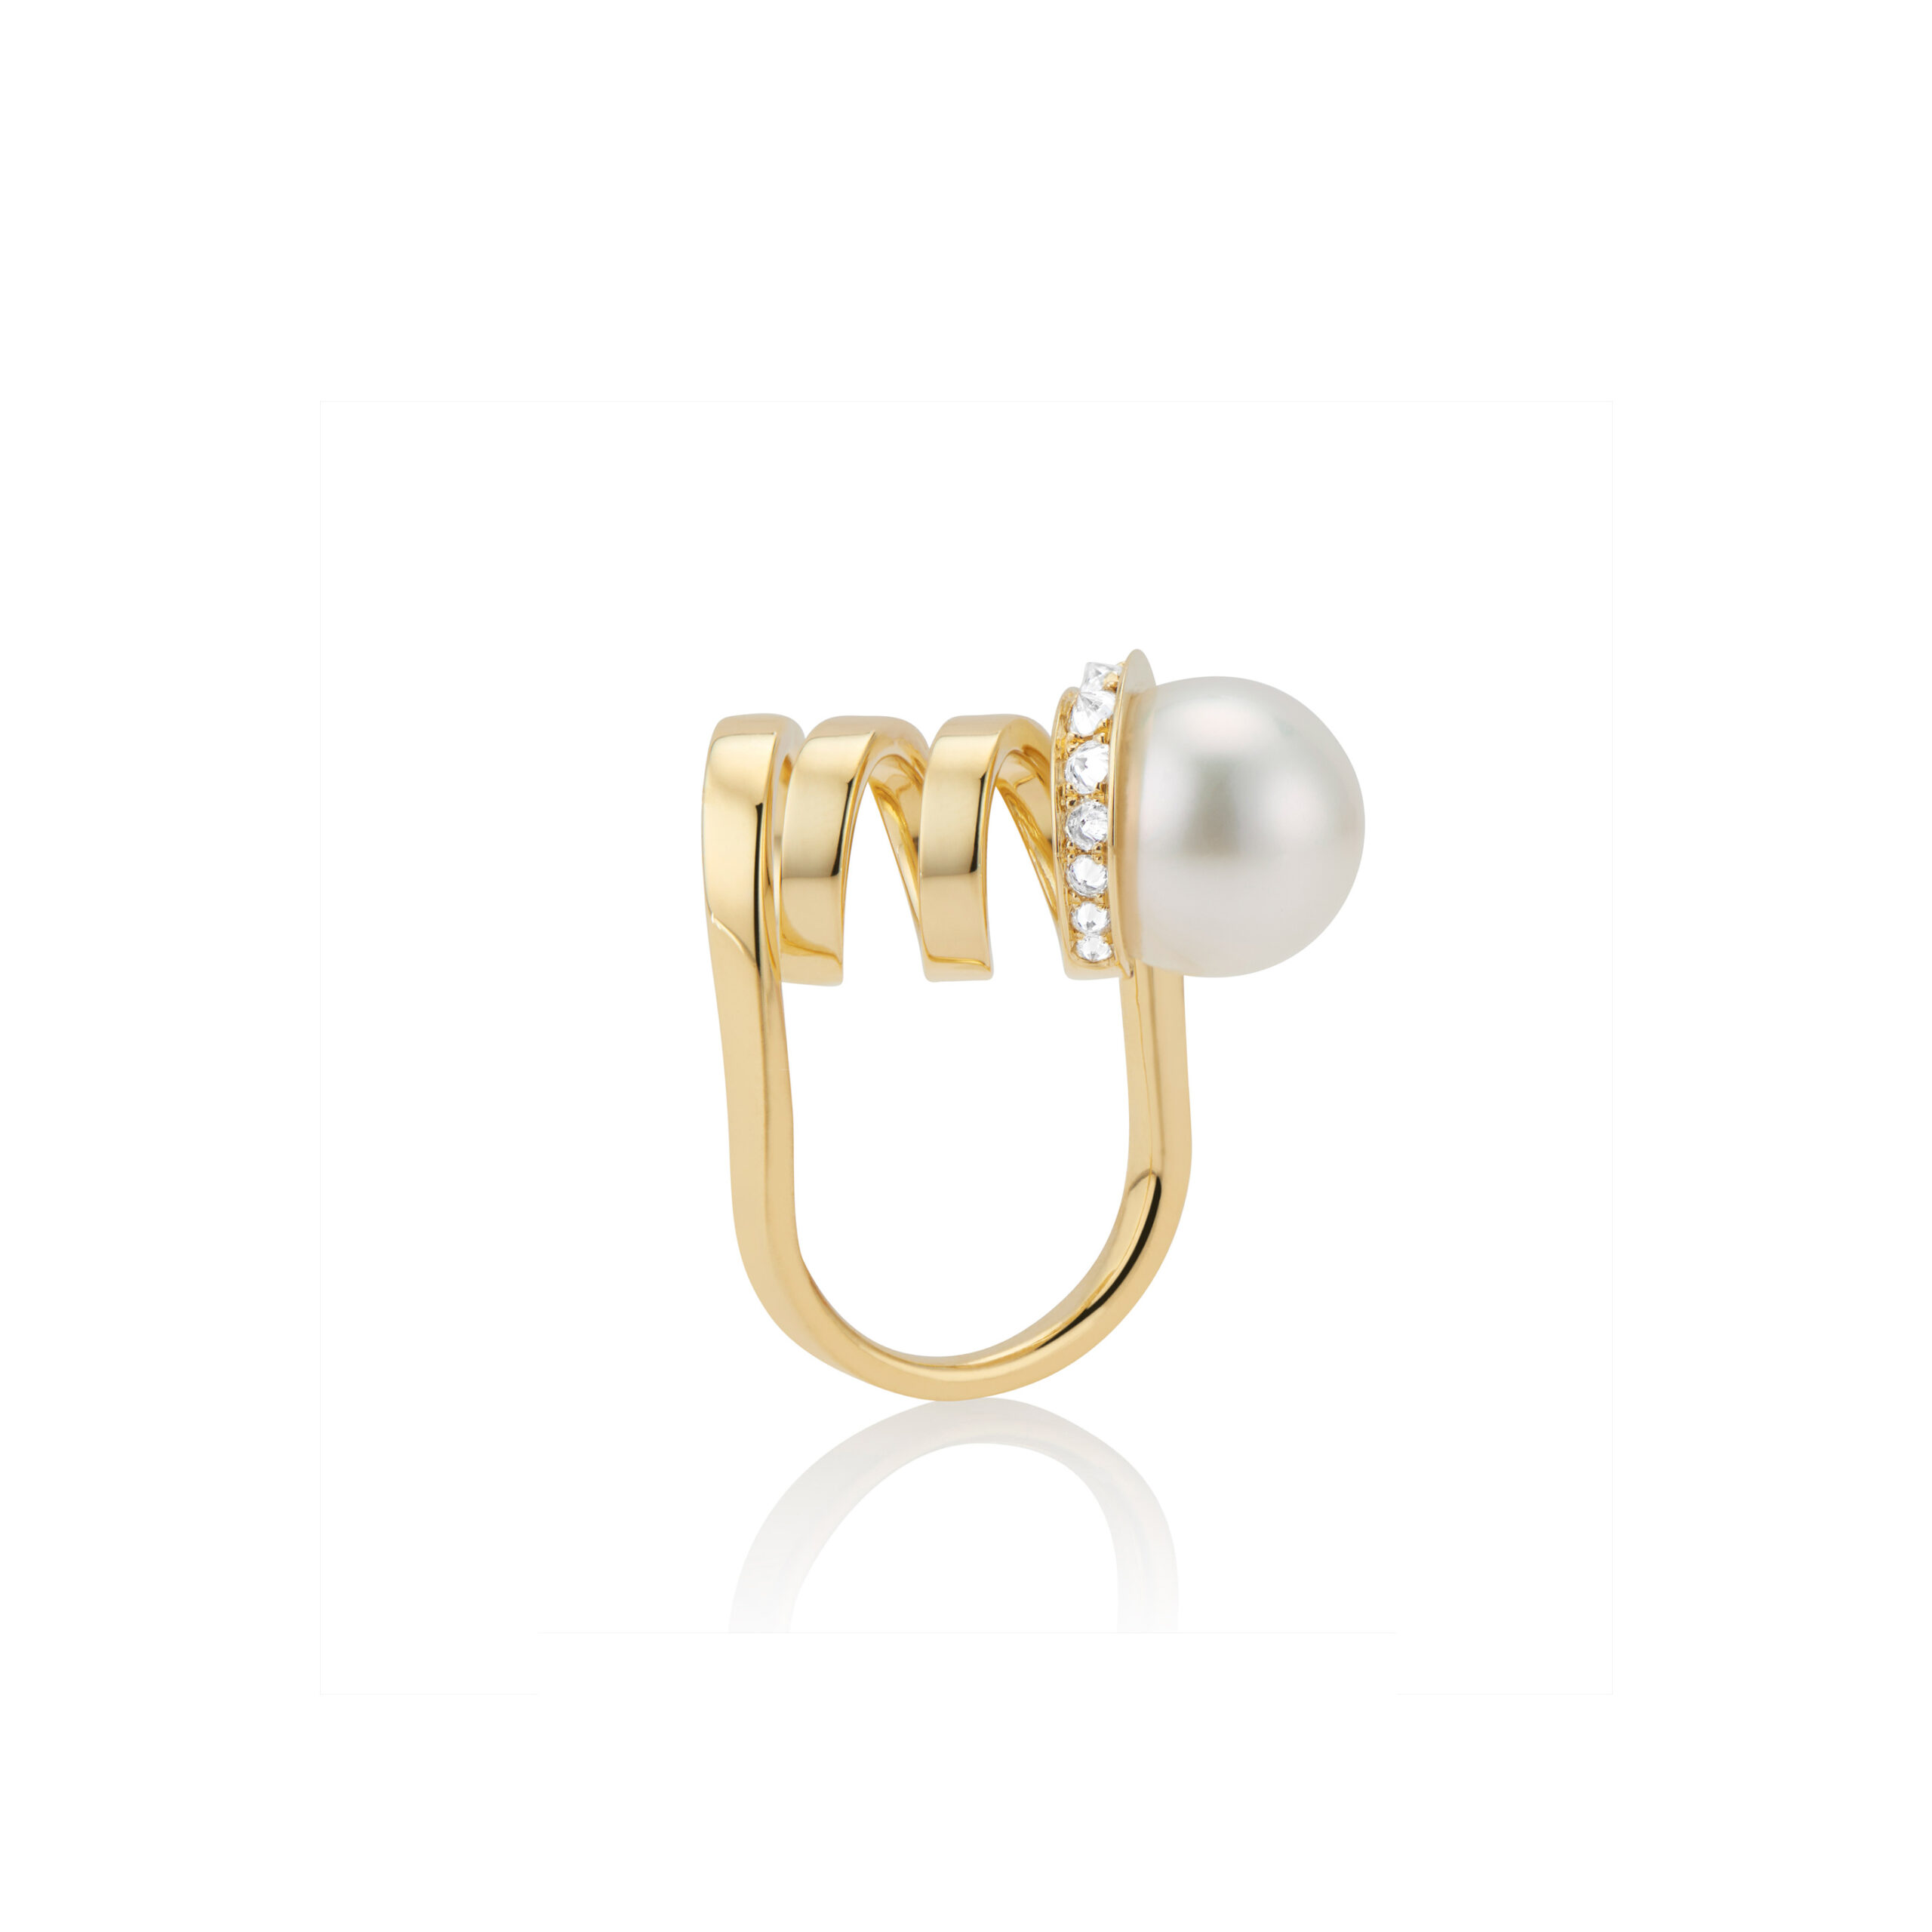 This is a product photo of the Solo Pearl Curl Ring by Renisis. It features 18K yellow gold with inverted diamonds and white South Sea Pearl rind is in profile and you can clearly see the large pearl and diamonds in a unique design.